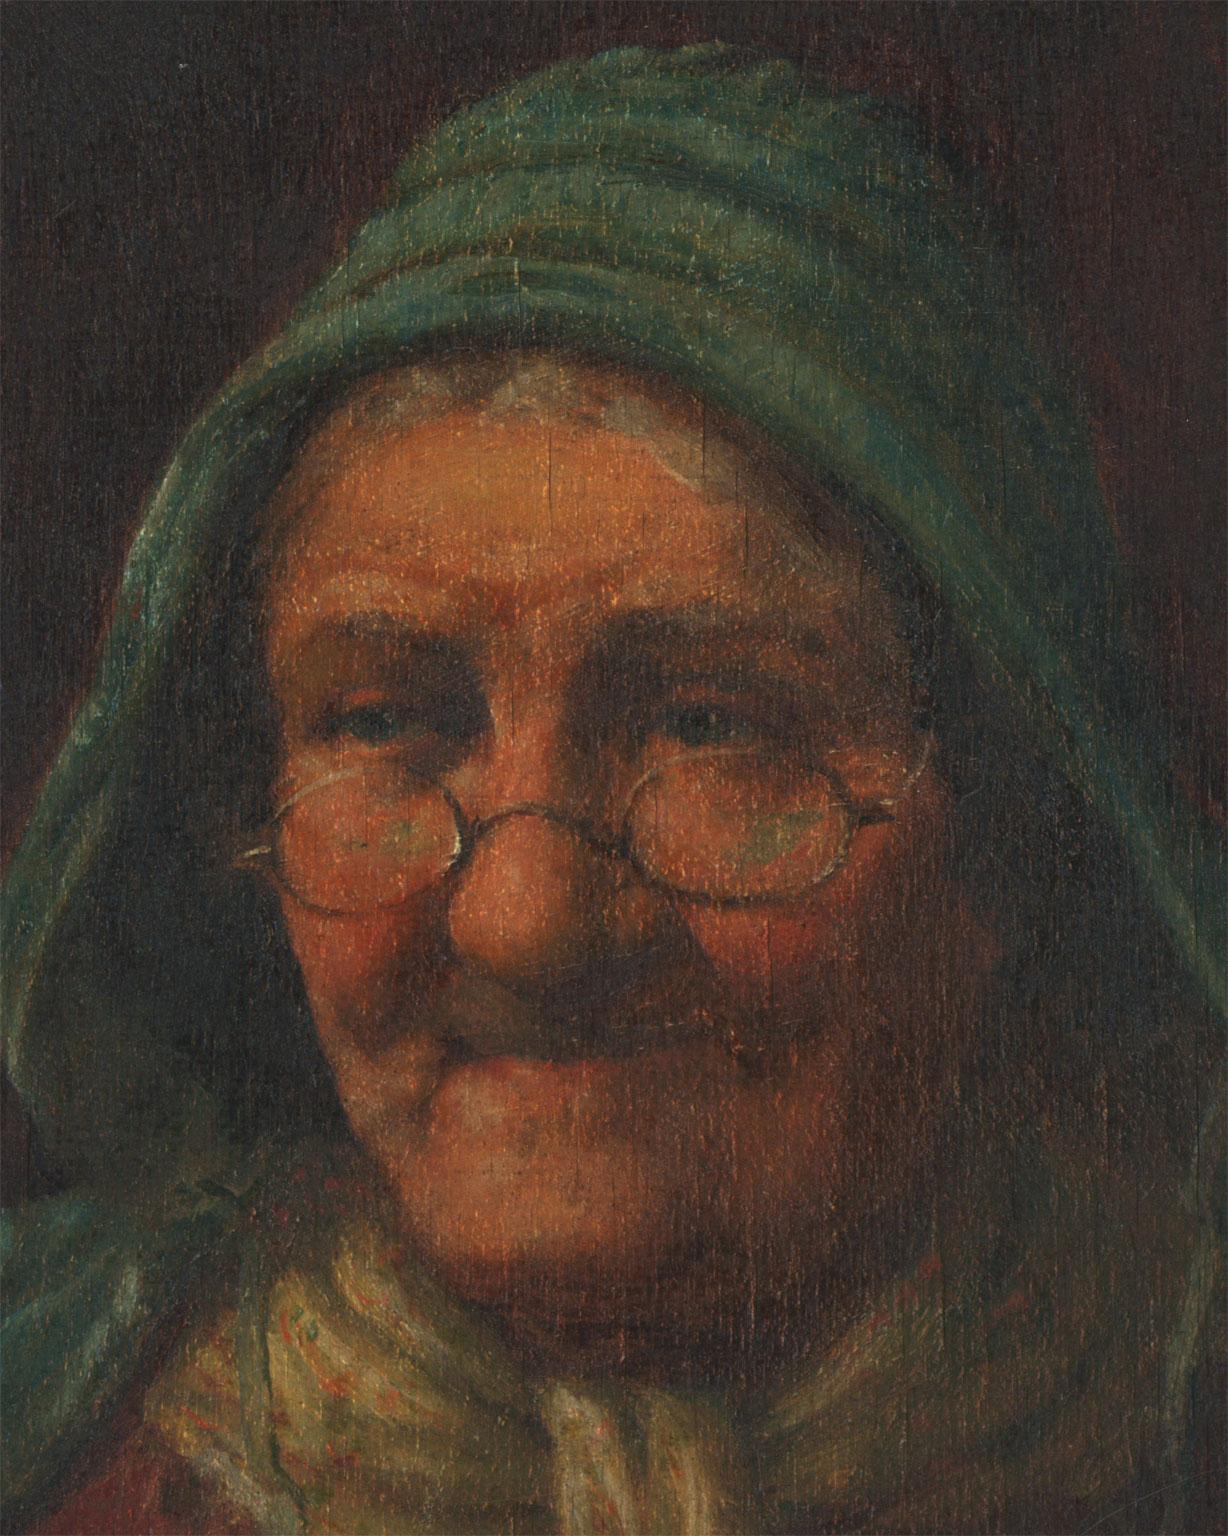 A very fine depiction of an elderly Dutch lady. The use of muted tones and subtle brushstrokes softens the focus to create an appealing portrait with nostalgic overtones. Signed indistinctly 'D.M.' to the lower left and inscribed illegibly to the